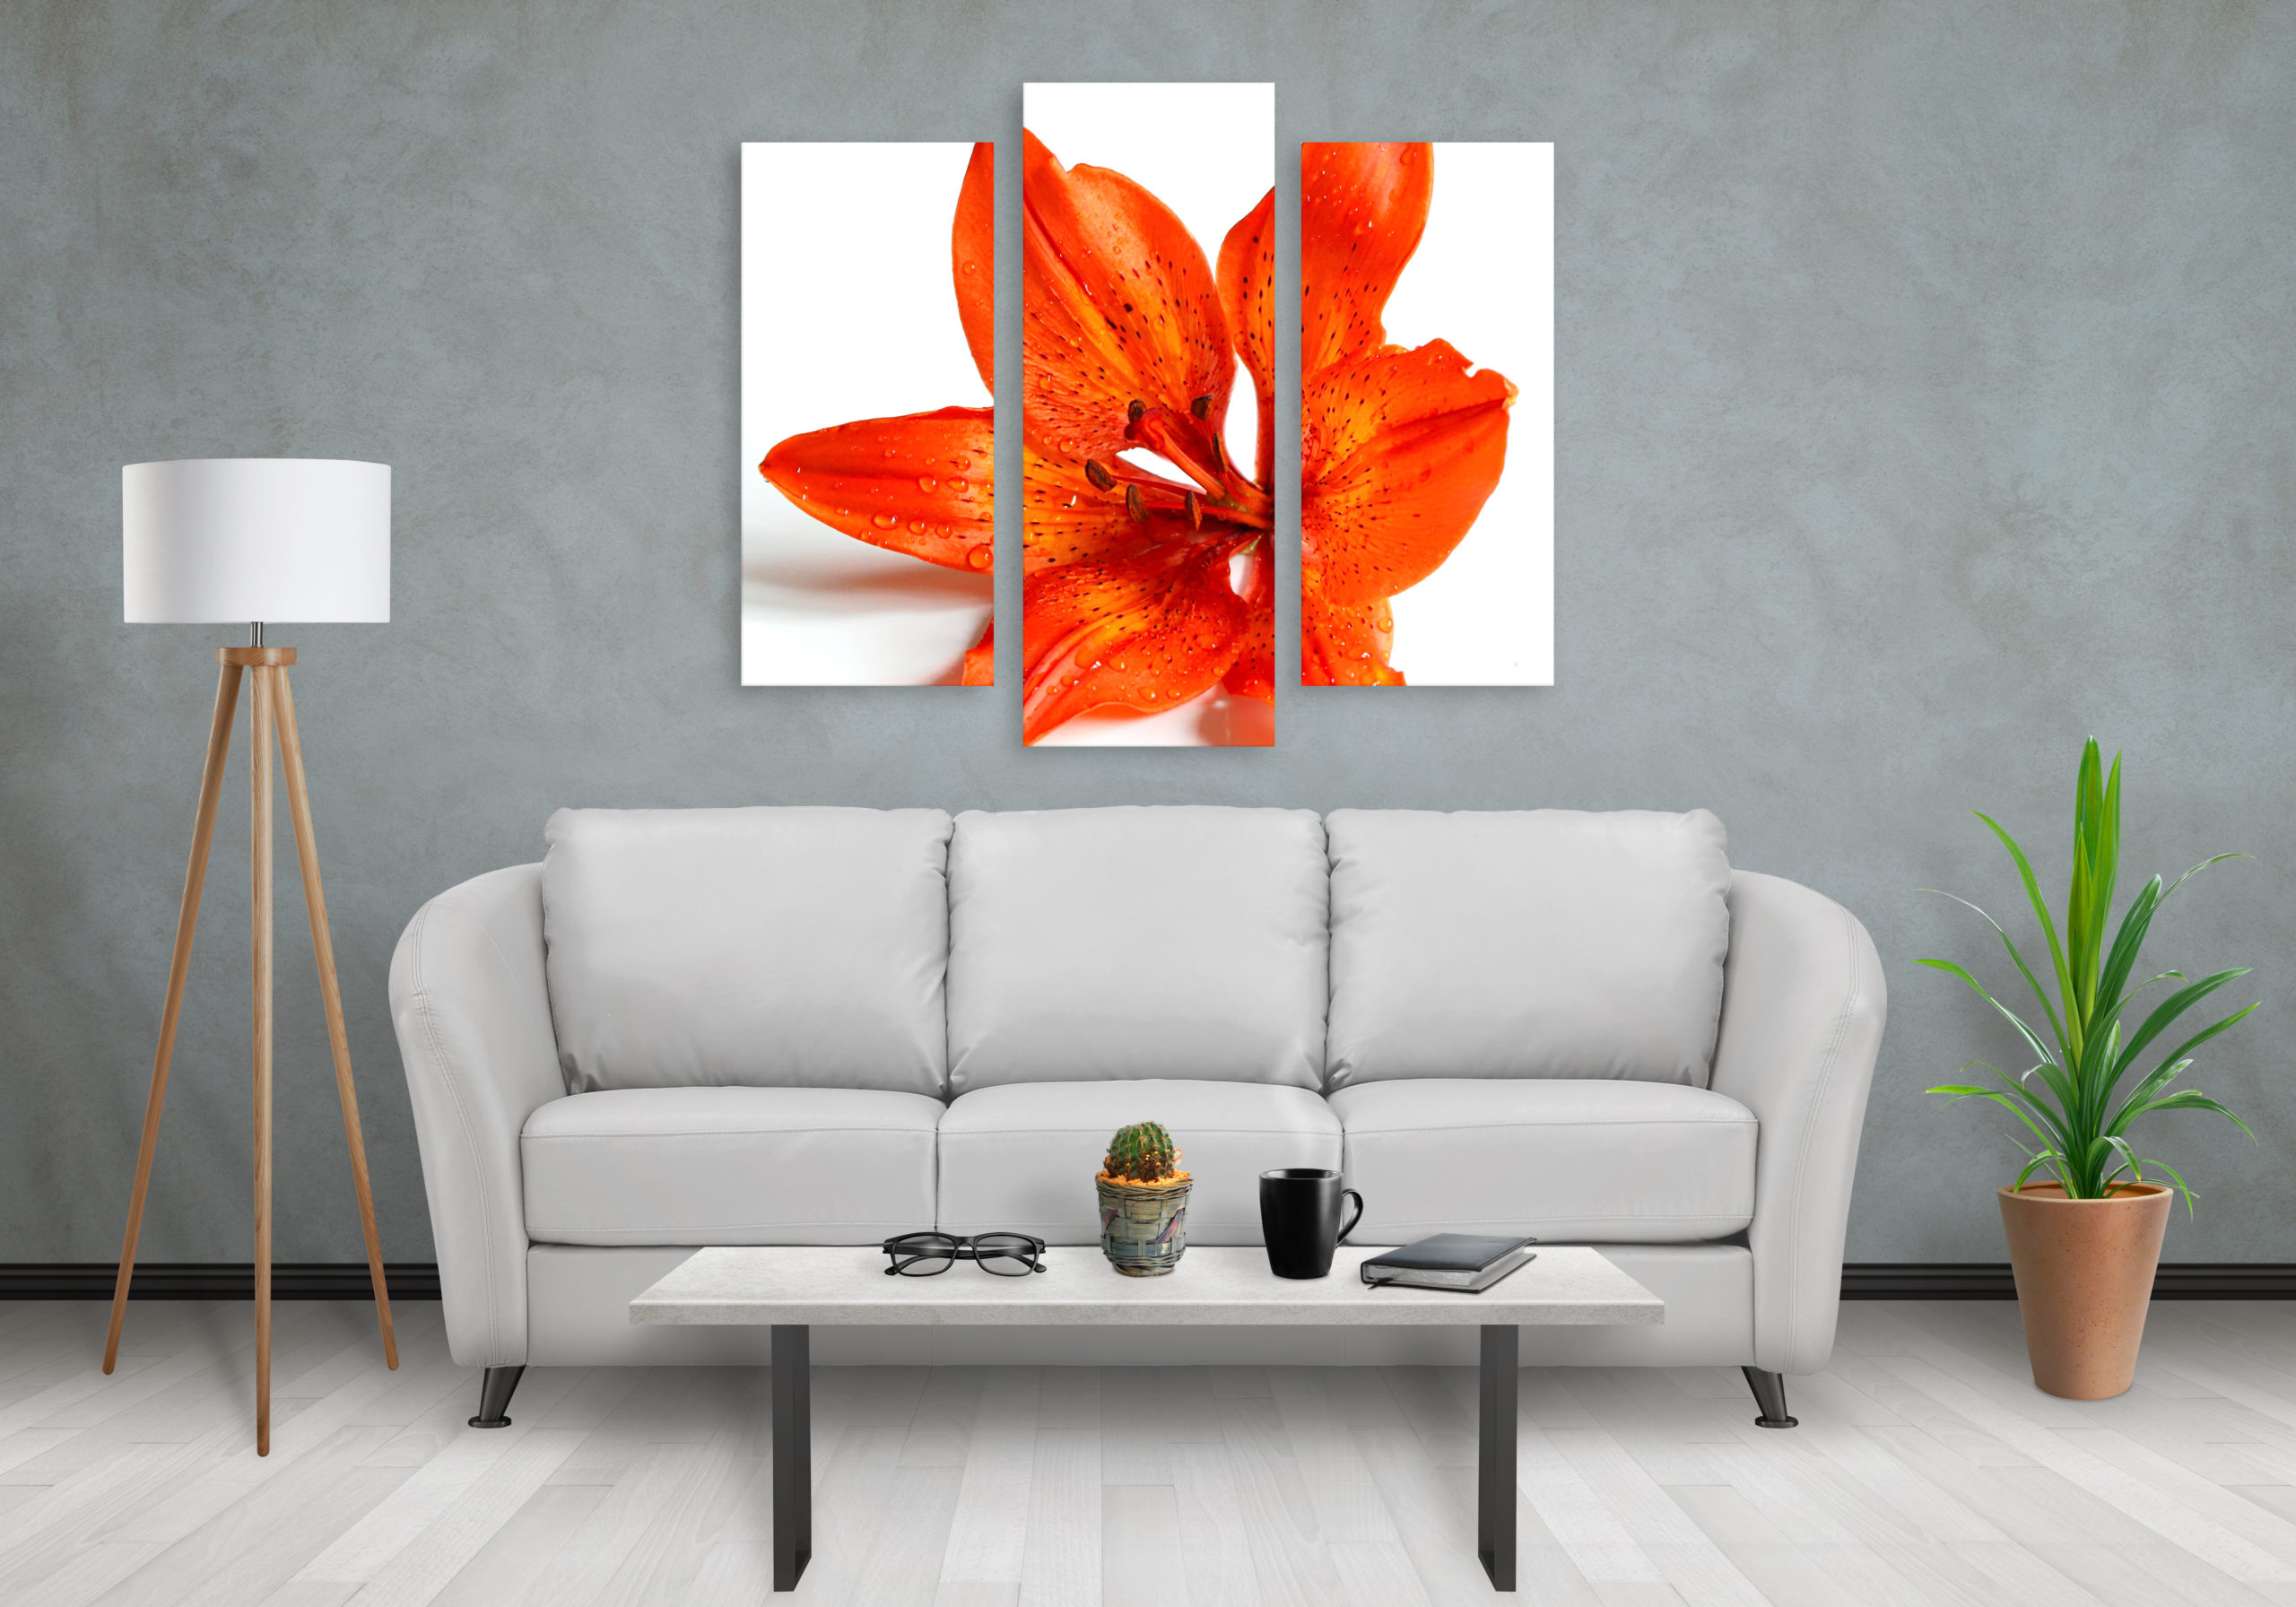 Canvas Prints - Great Art for your Home